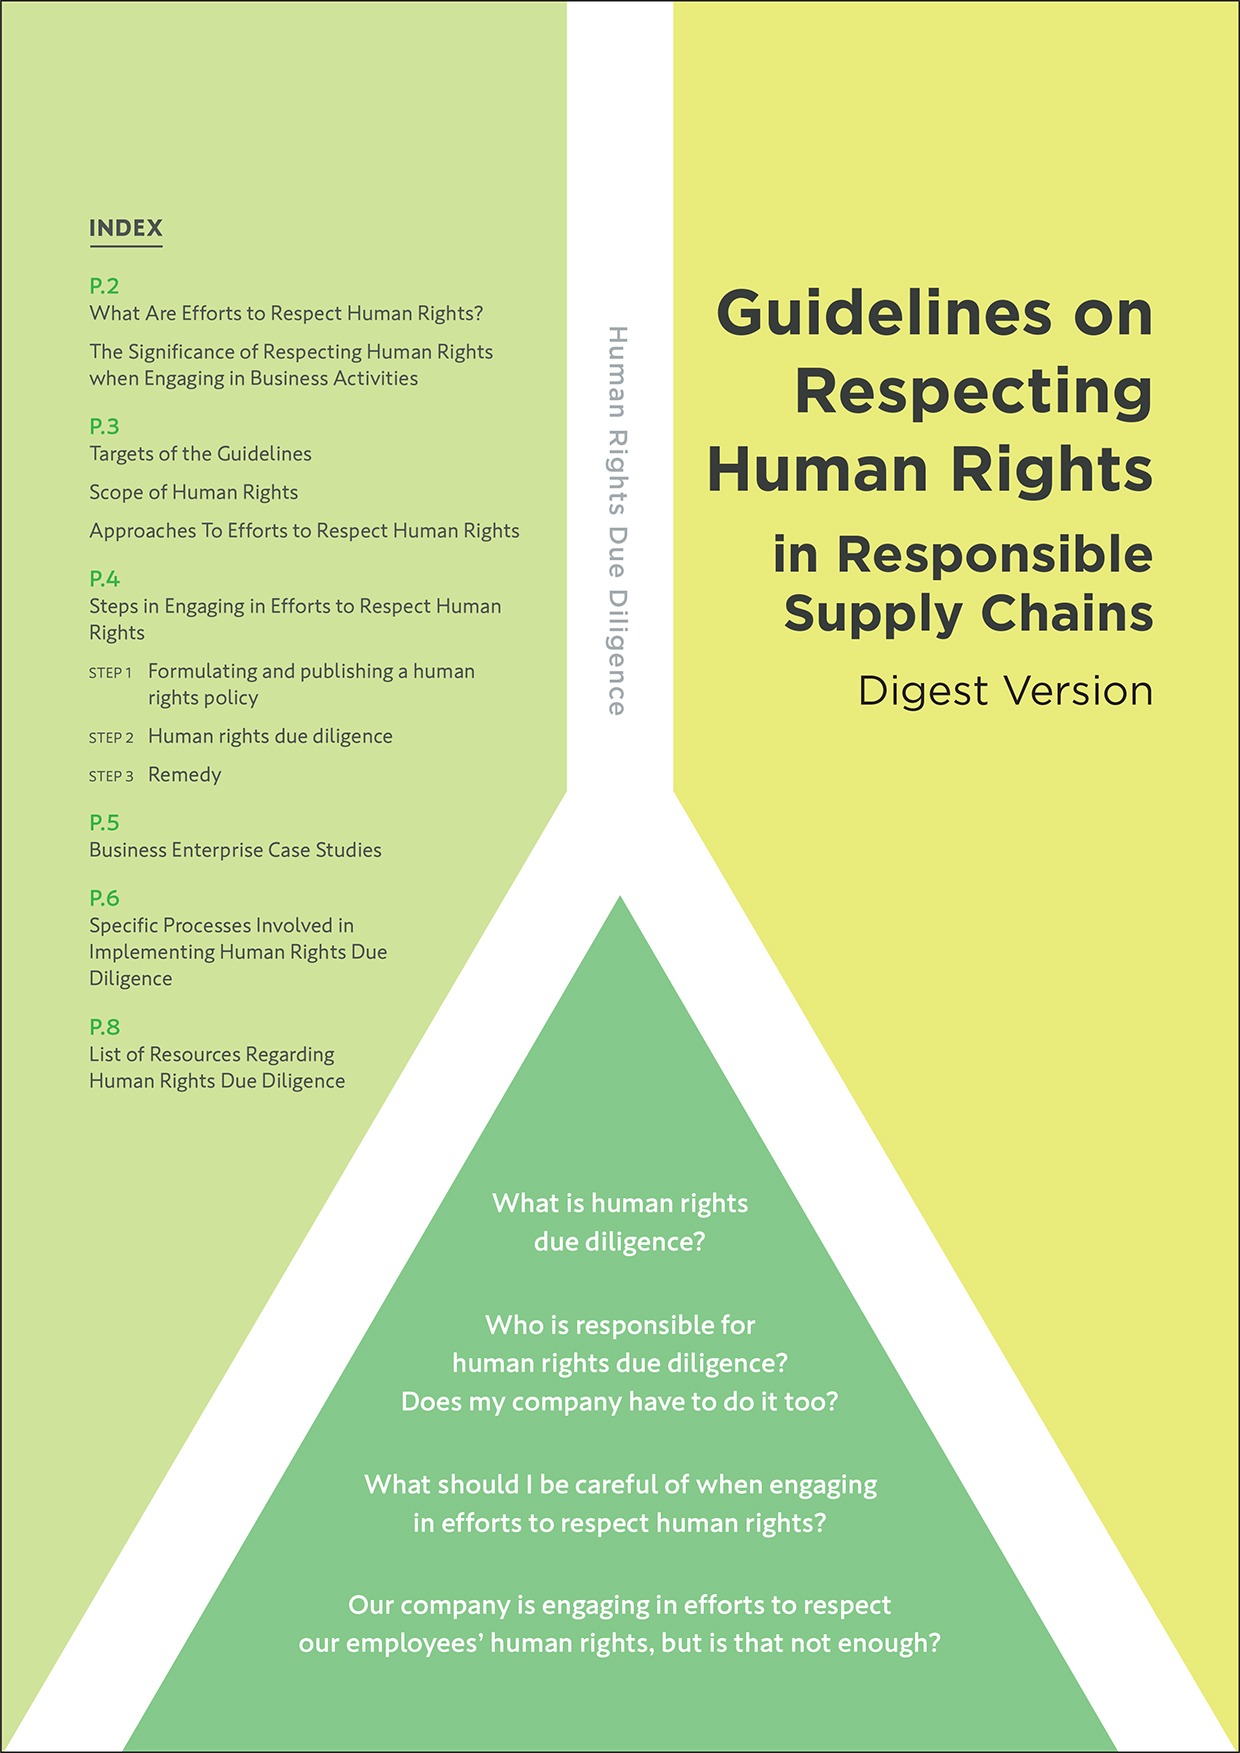 Guidelines on Respecting Human Rights in Responsible Supply Chains - Digest Version